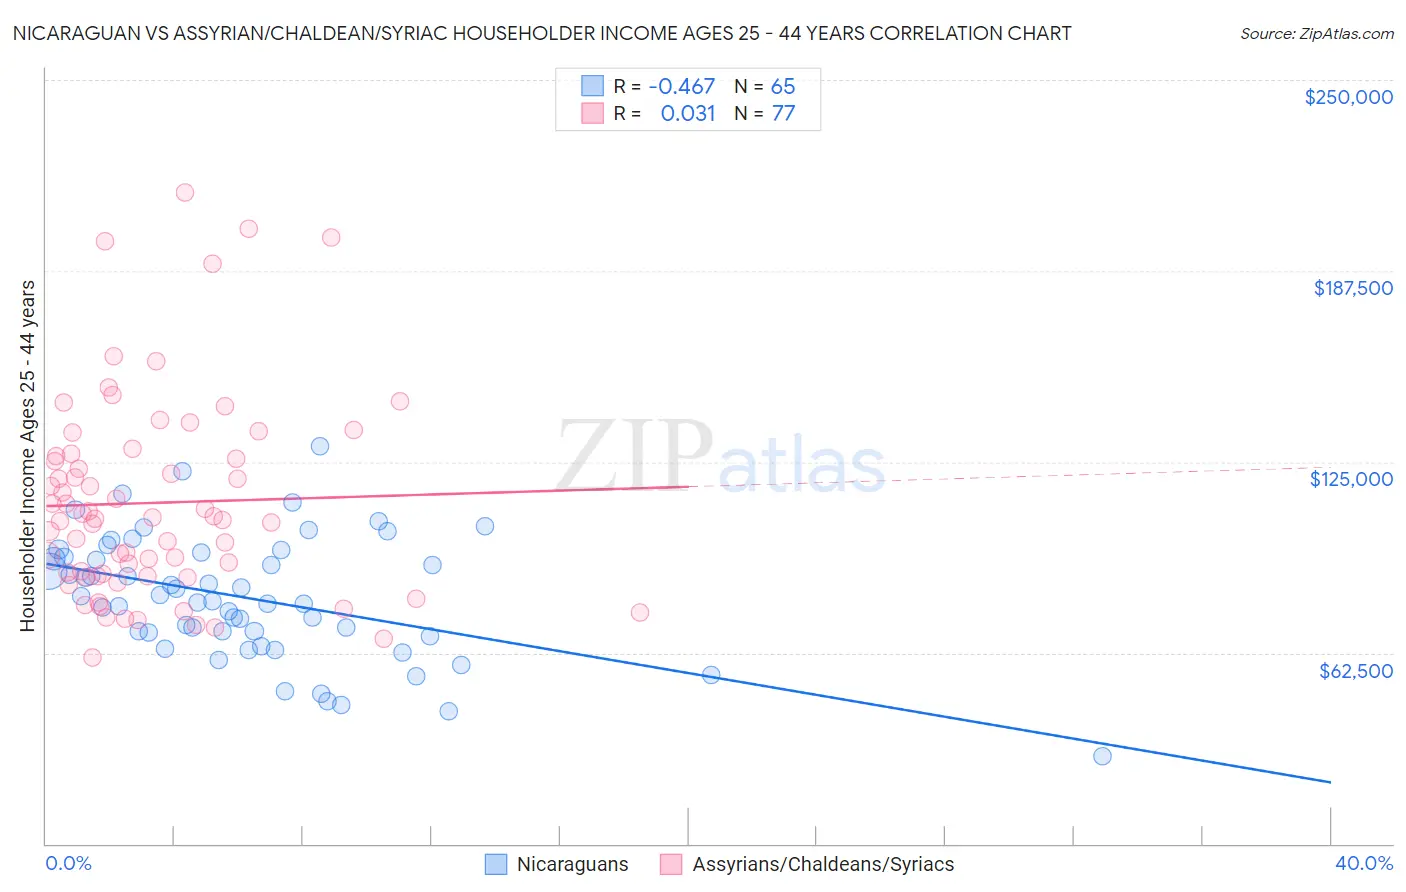 Nicaraguan vs Assyrian/Chaldean/Syriac Householder Income Ages 25 - 44 years